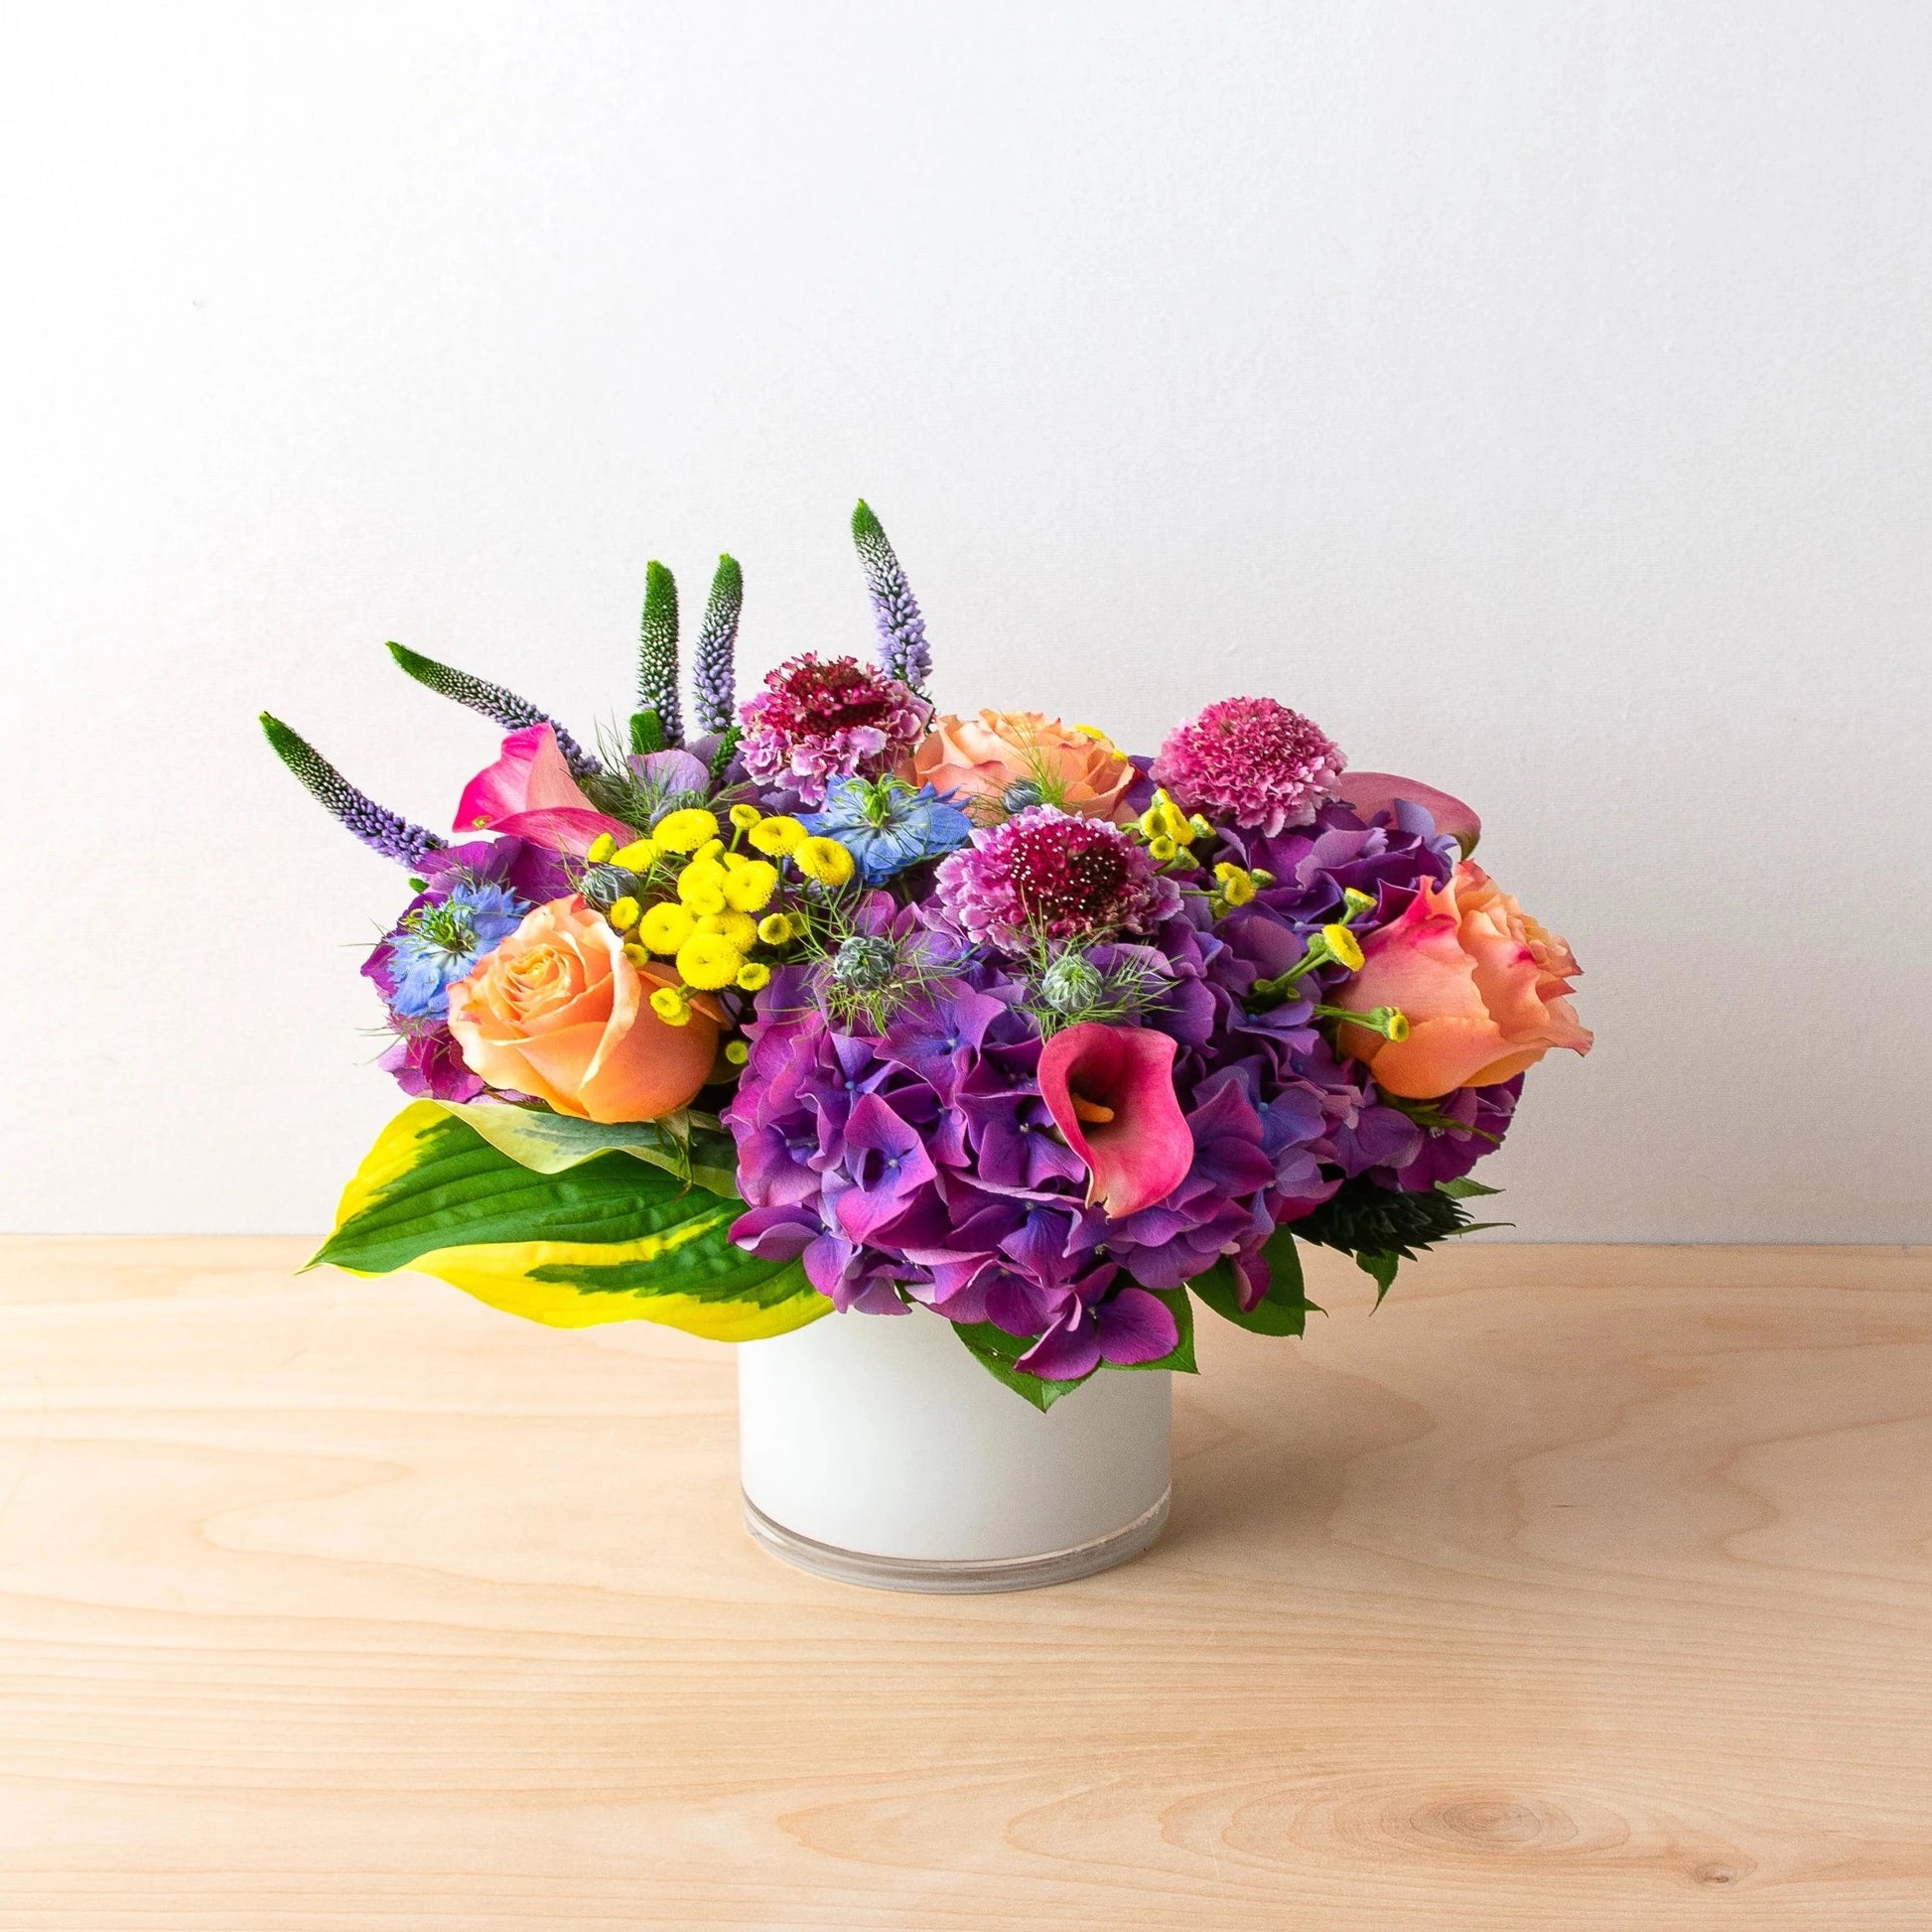 A classical mix of flowers that forms the perfect shade of enjoyment.   Flower List:  Purple Hydrangea  Peach Rose  Scabiosa  Veronica  Note: exact flowers will vary. Our team will always choose the freshest, most unique seasonal flower.